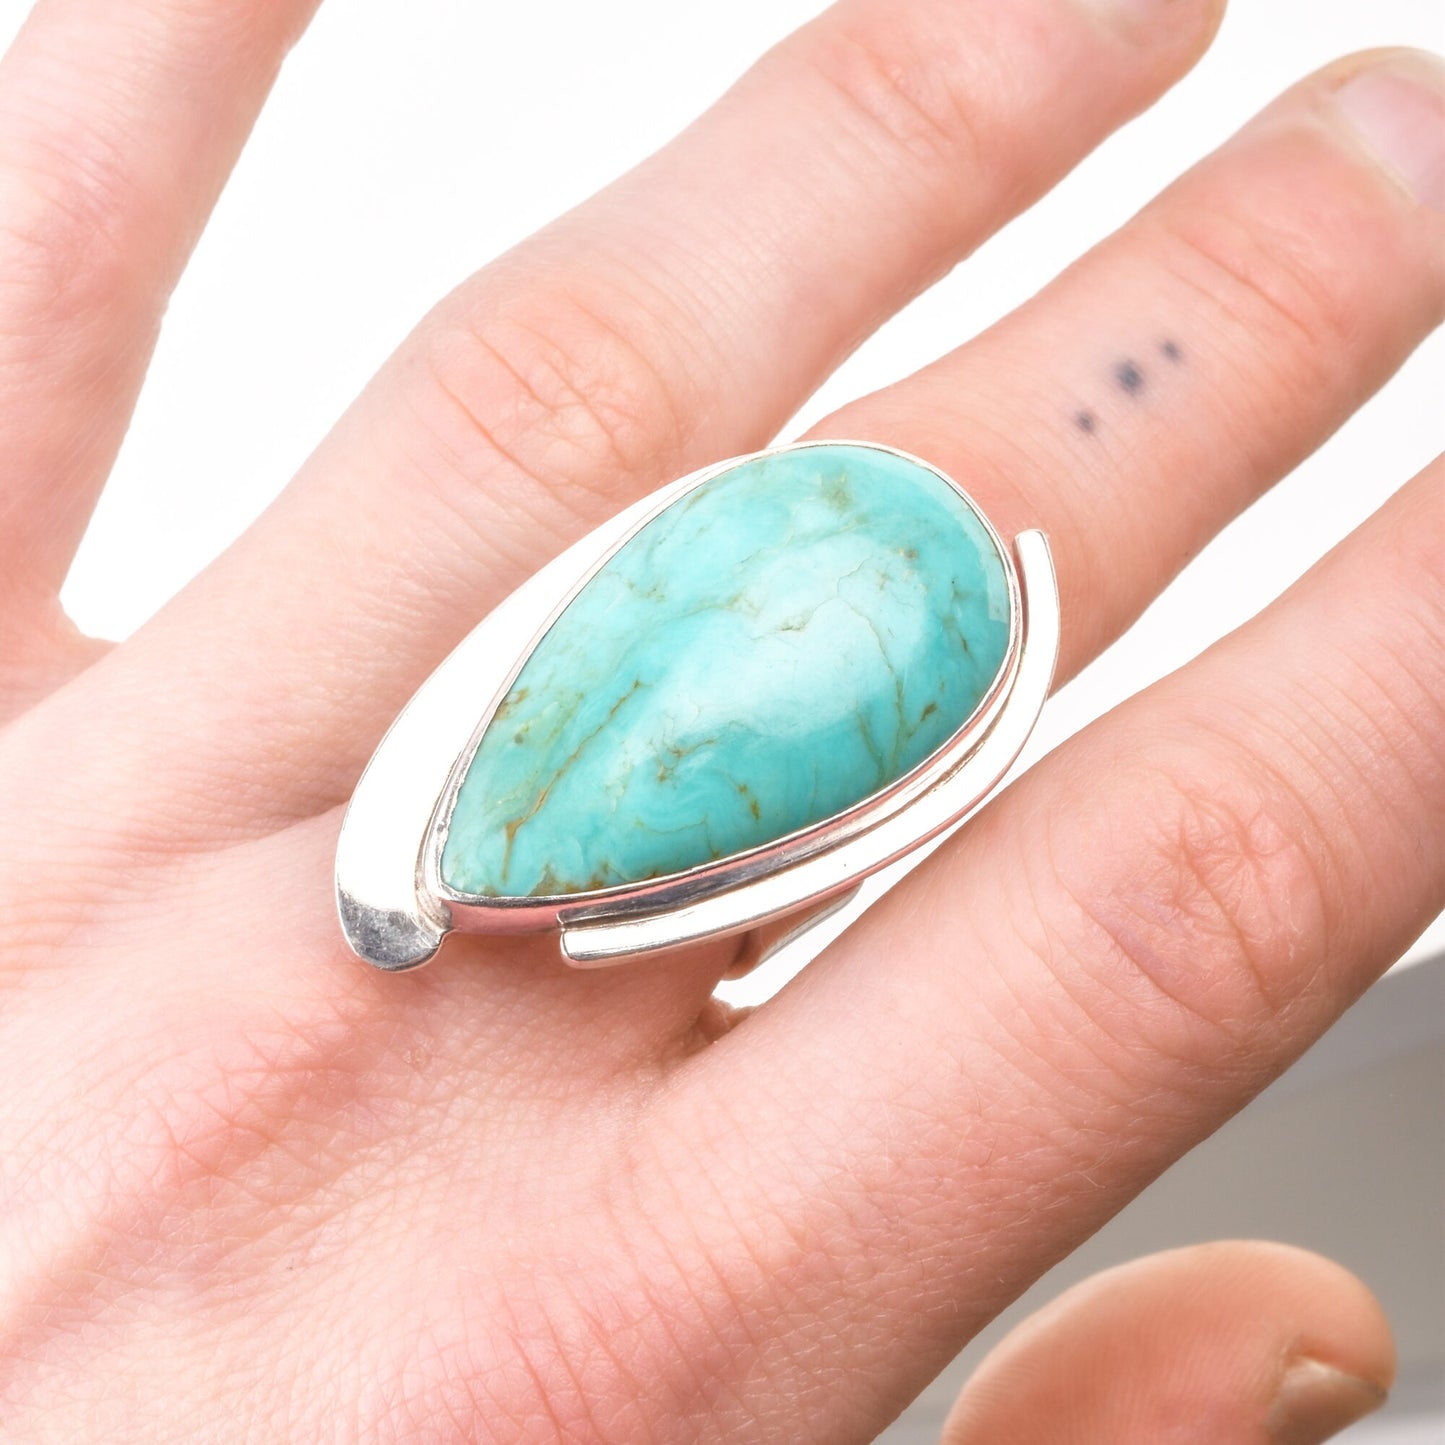 Modernist 950 Sterling Silver Turquoise Teardrop Ring By Lapidarios Barrera, Adjustable Wrap Band, Size 7-10 US